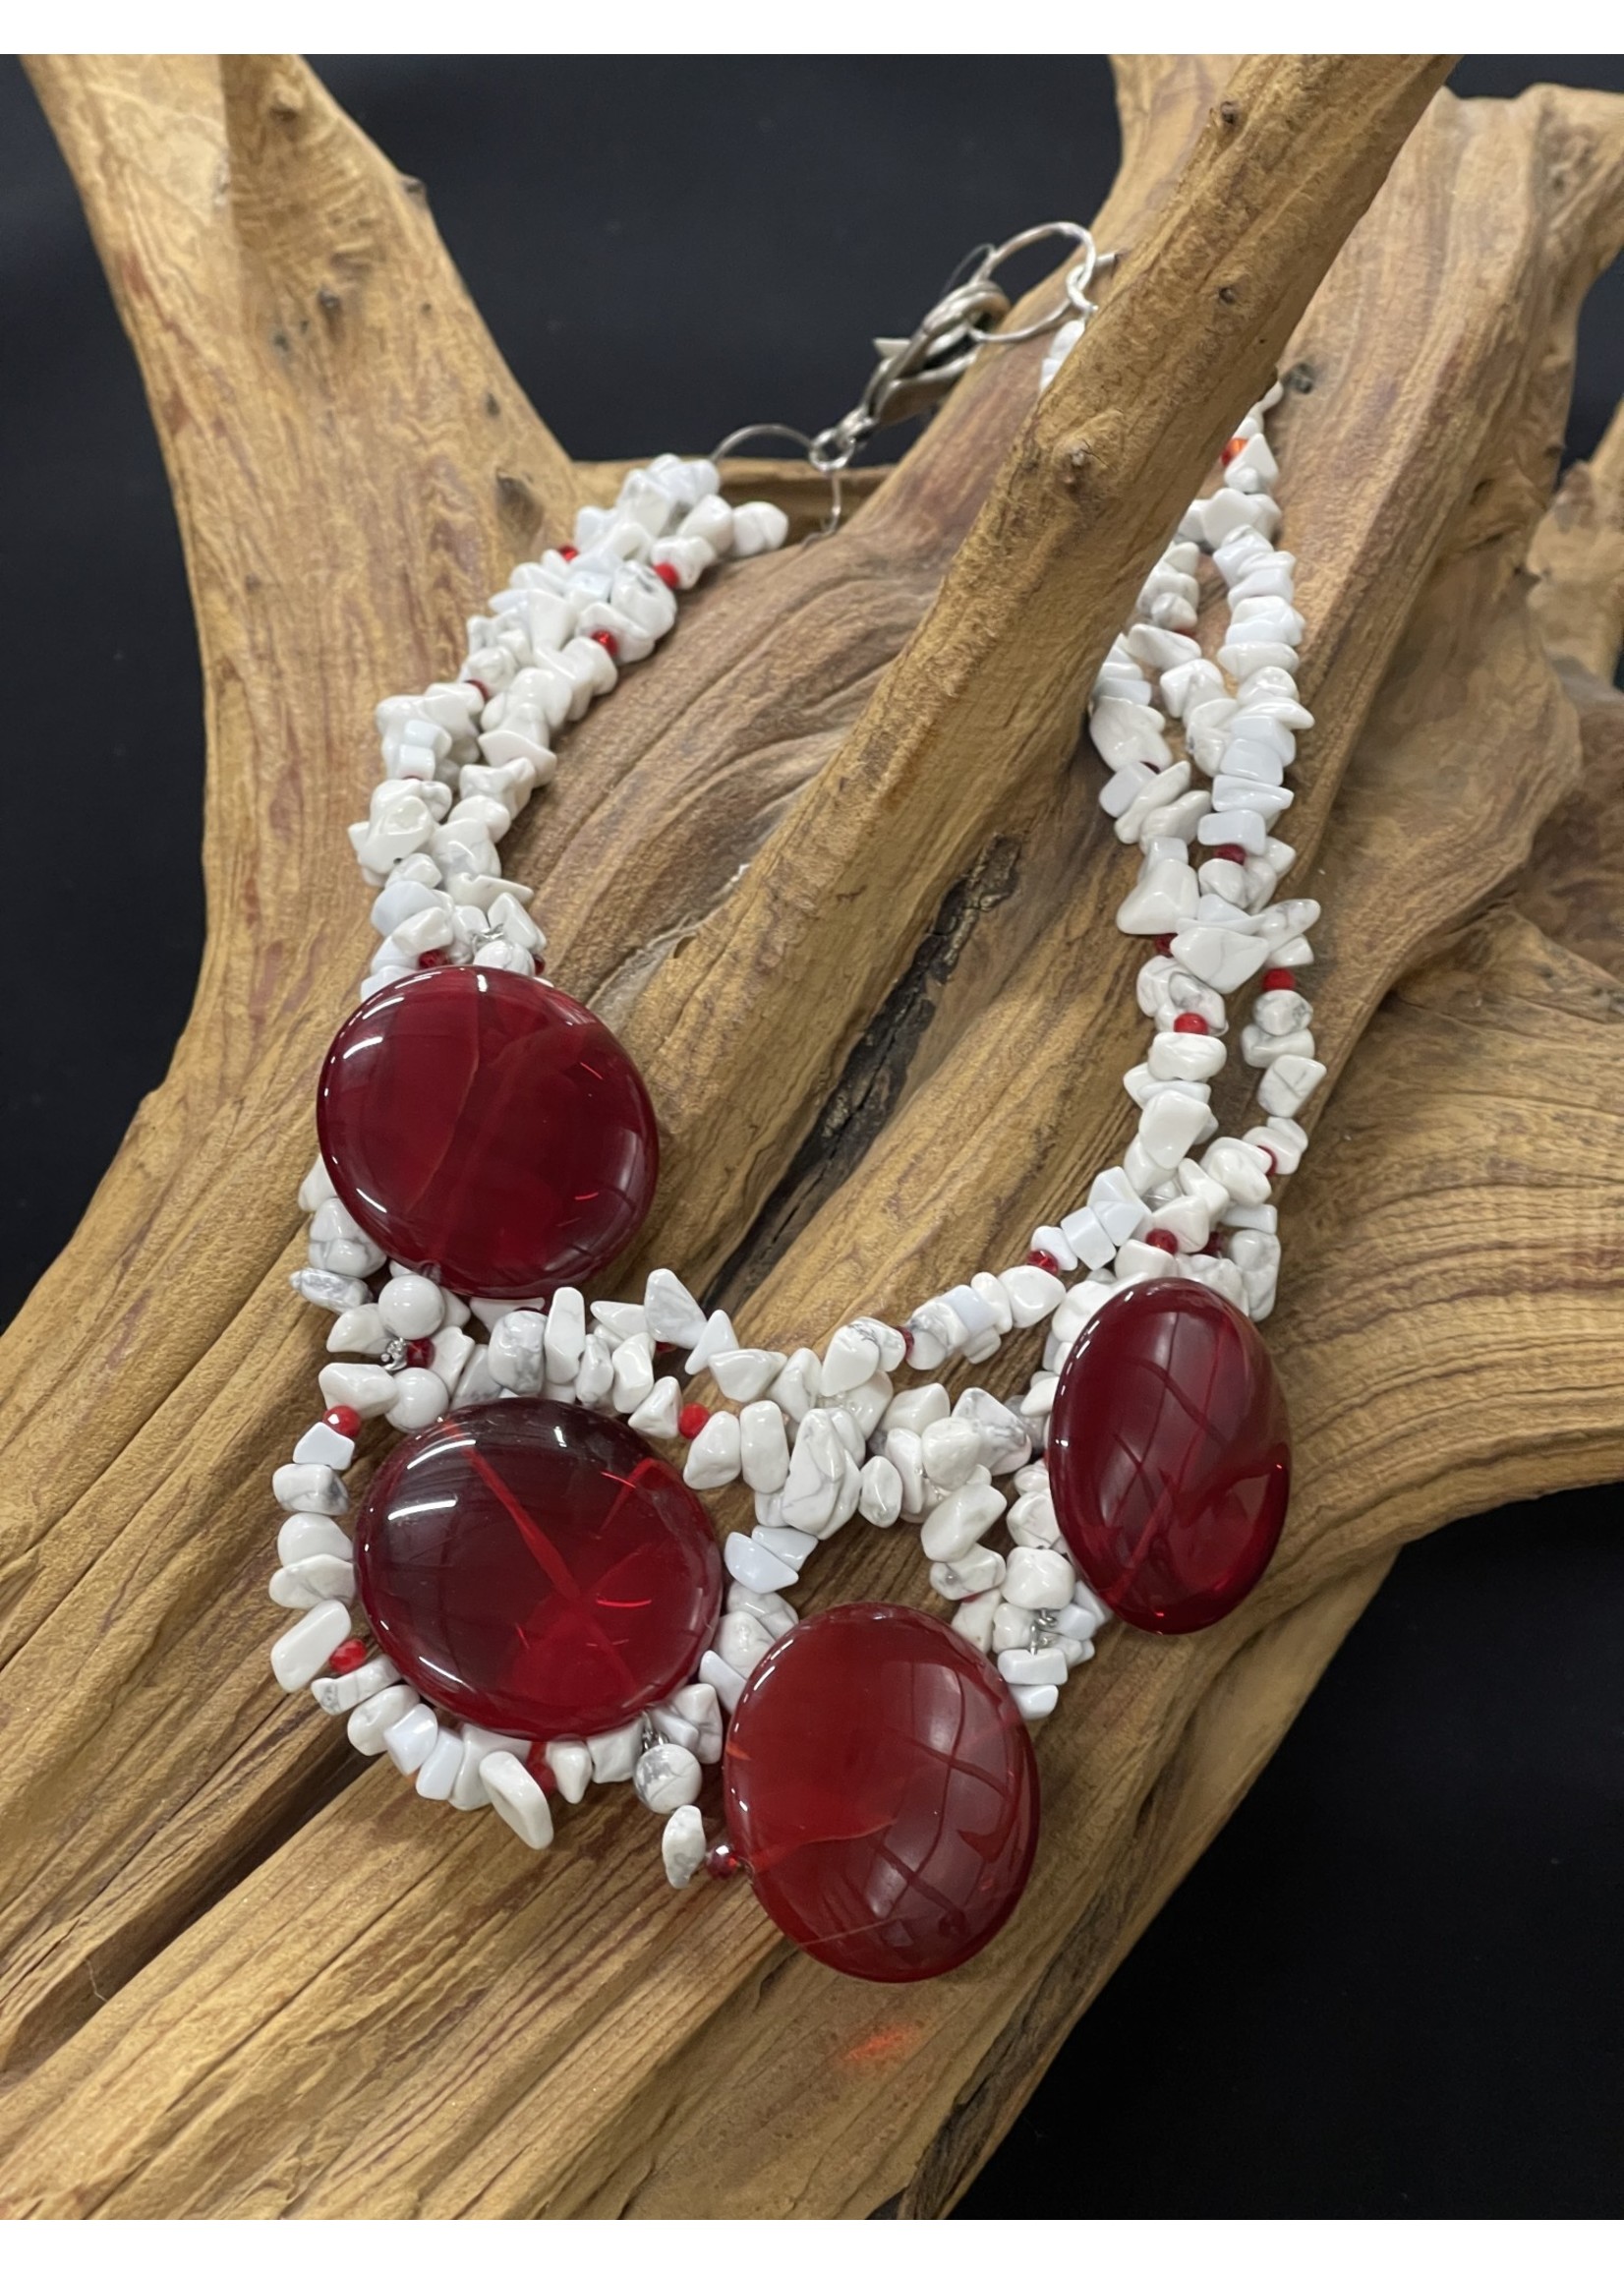 AC01-4598-21 White turquoise W/ red jade necklace